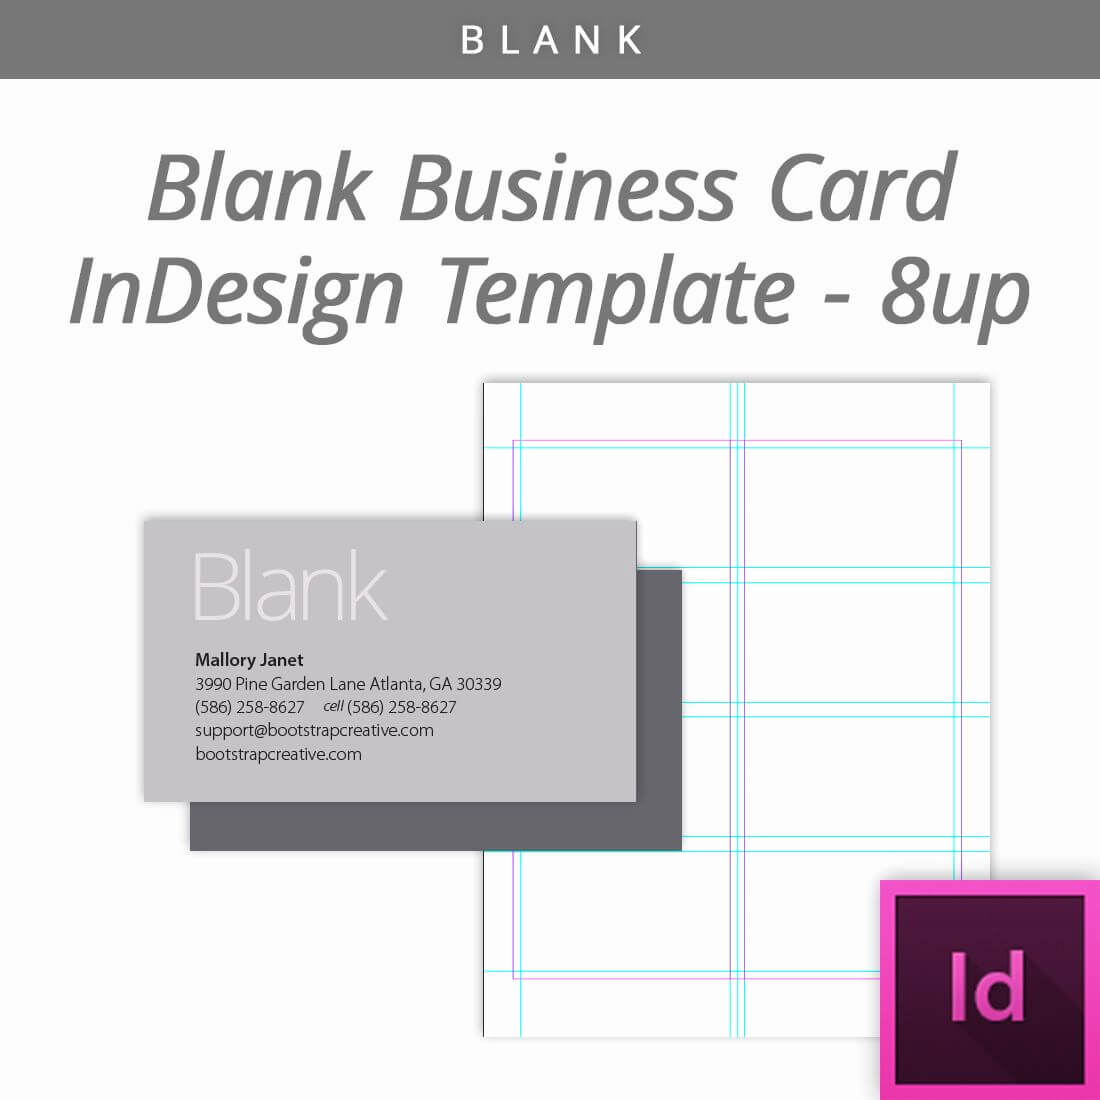 Fdb30 Blank Business Card Template – Cvaanmeldservice.nl Throughout Visiting Card Illustrator Templates Download